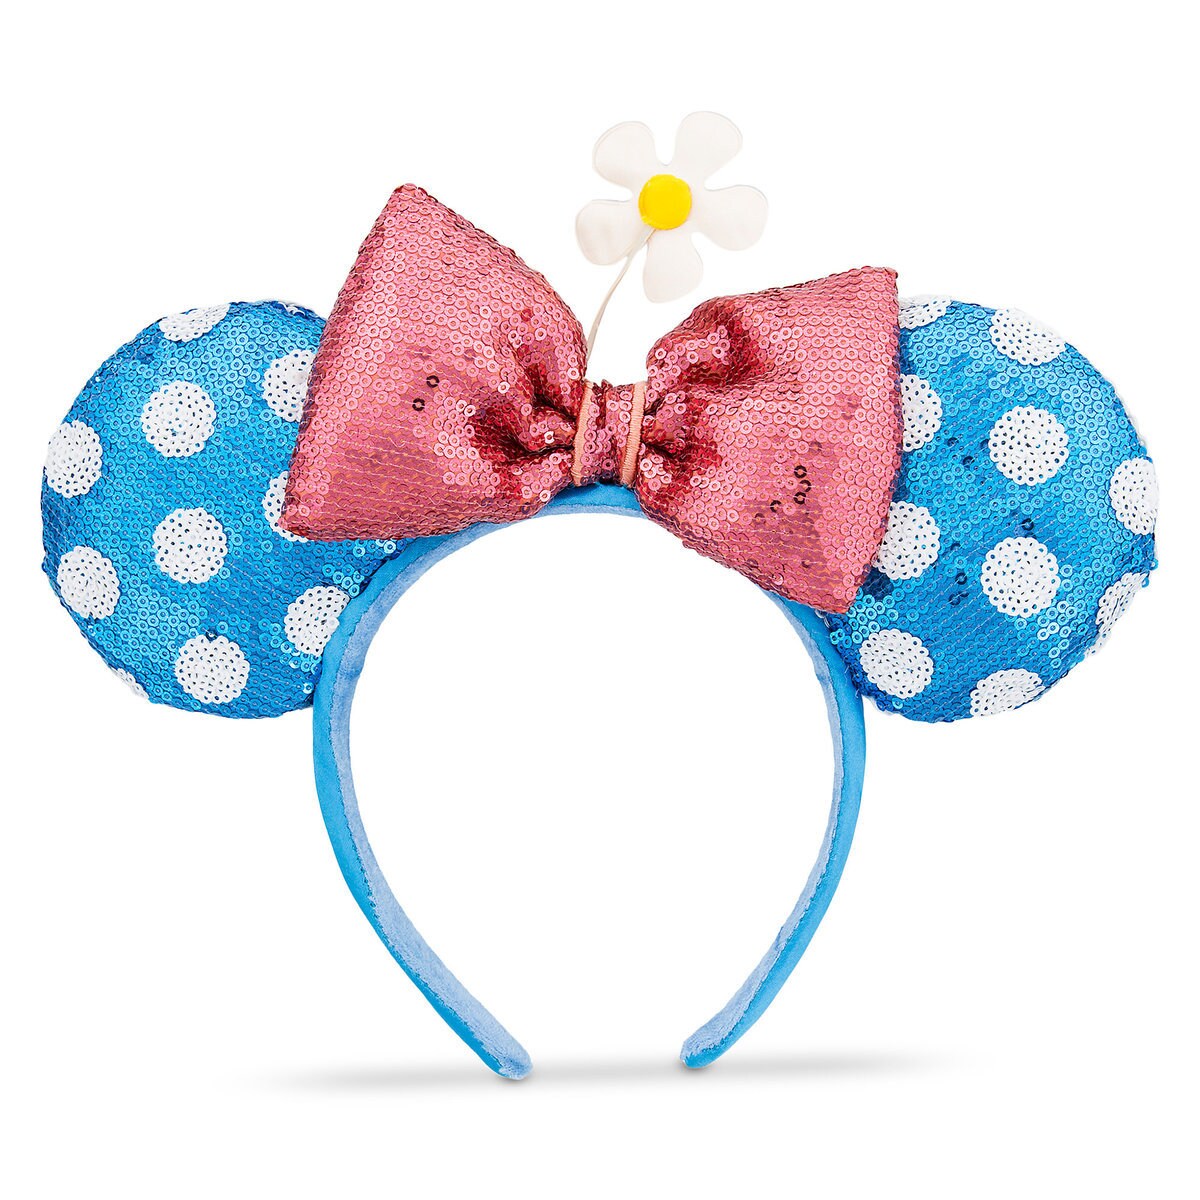 Product Image of Minnie Mouse Timeless Ear Headband # 1